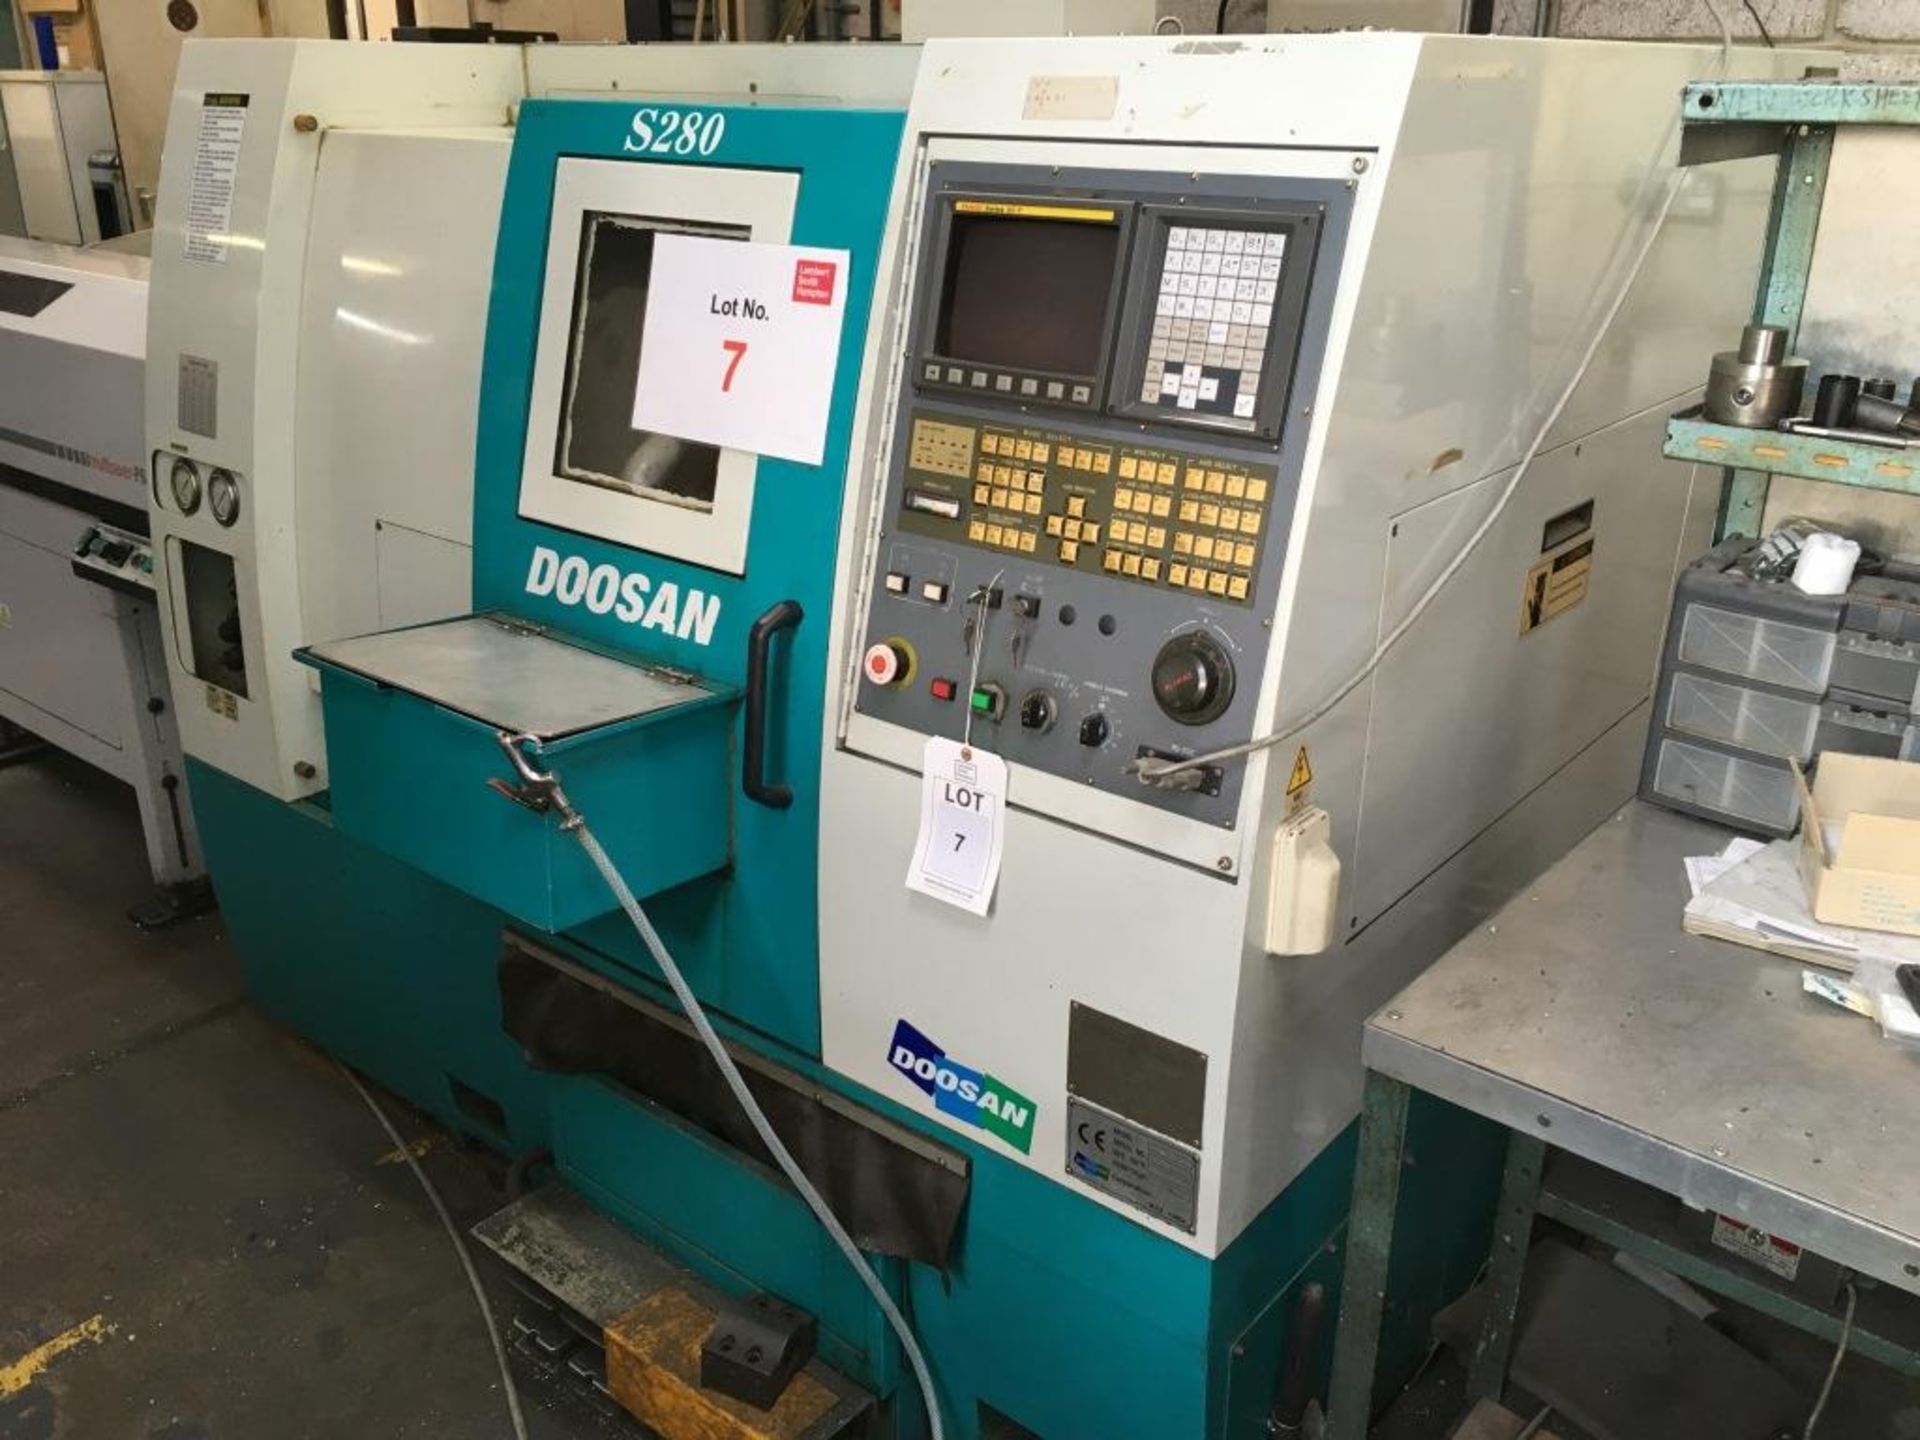 Doosan S280 CNC lathe with FANUC Series Oi-T control, 10 tool changer, Serial No. LNG-1142 with